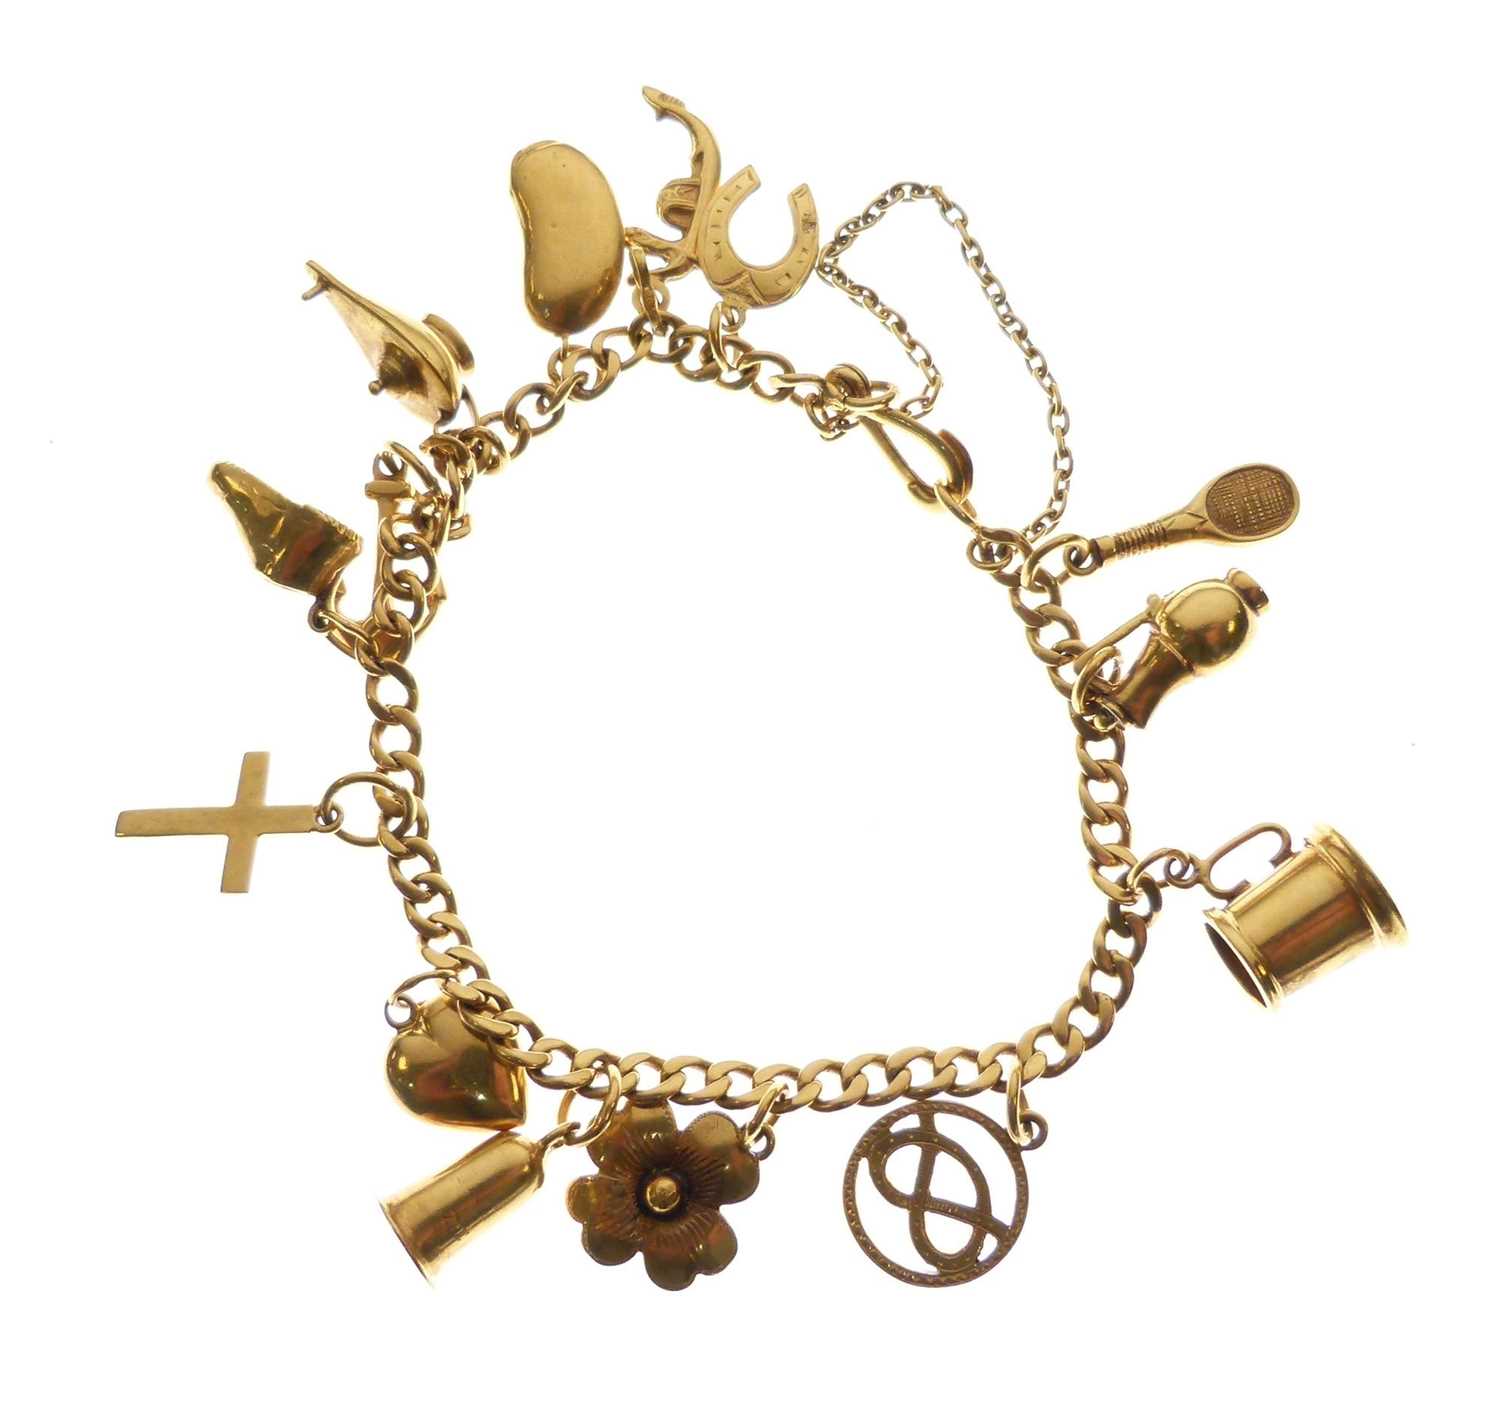 Yellow metal bracelet with various charms attached